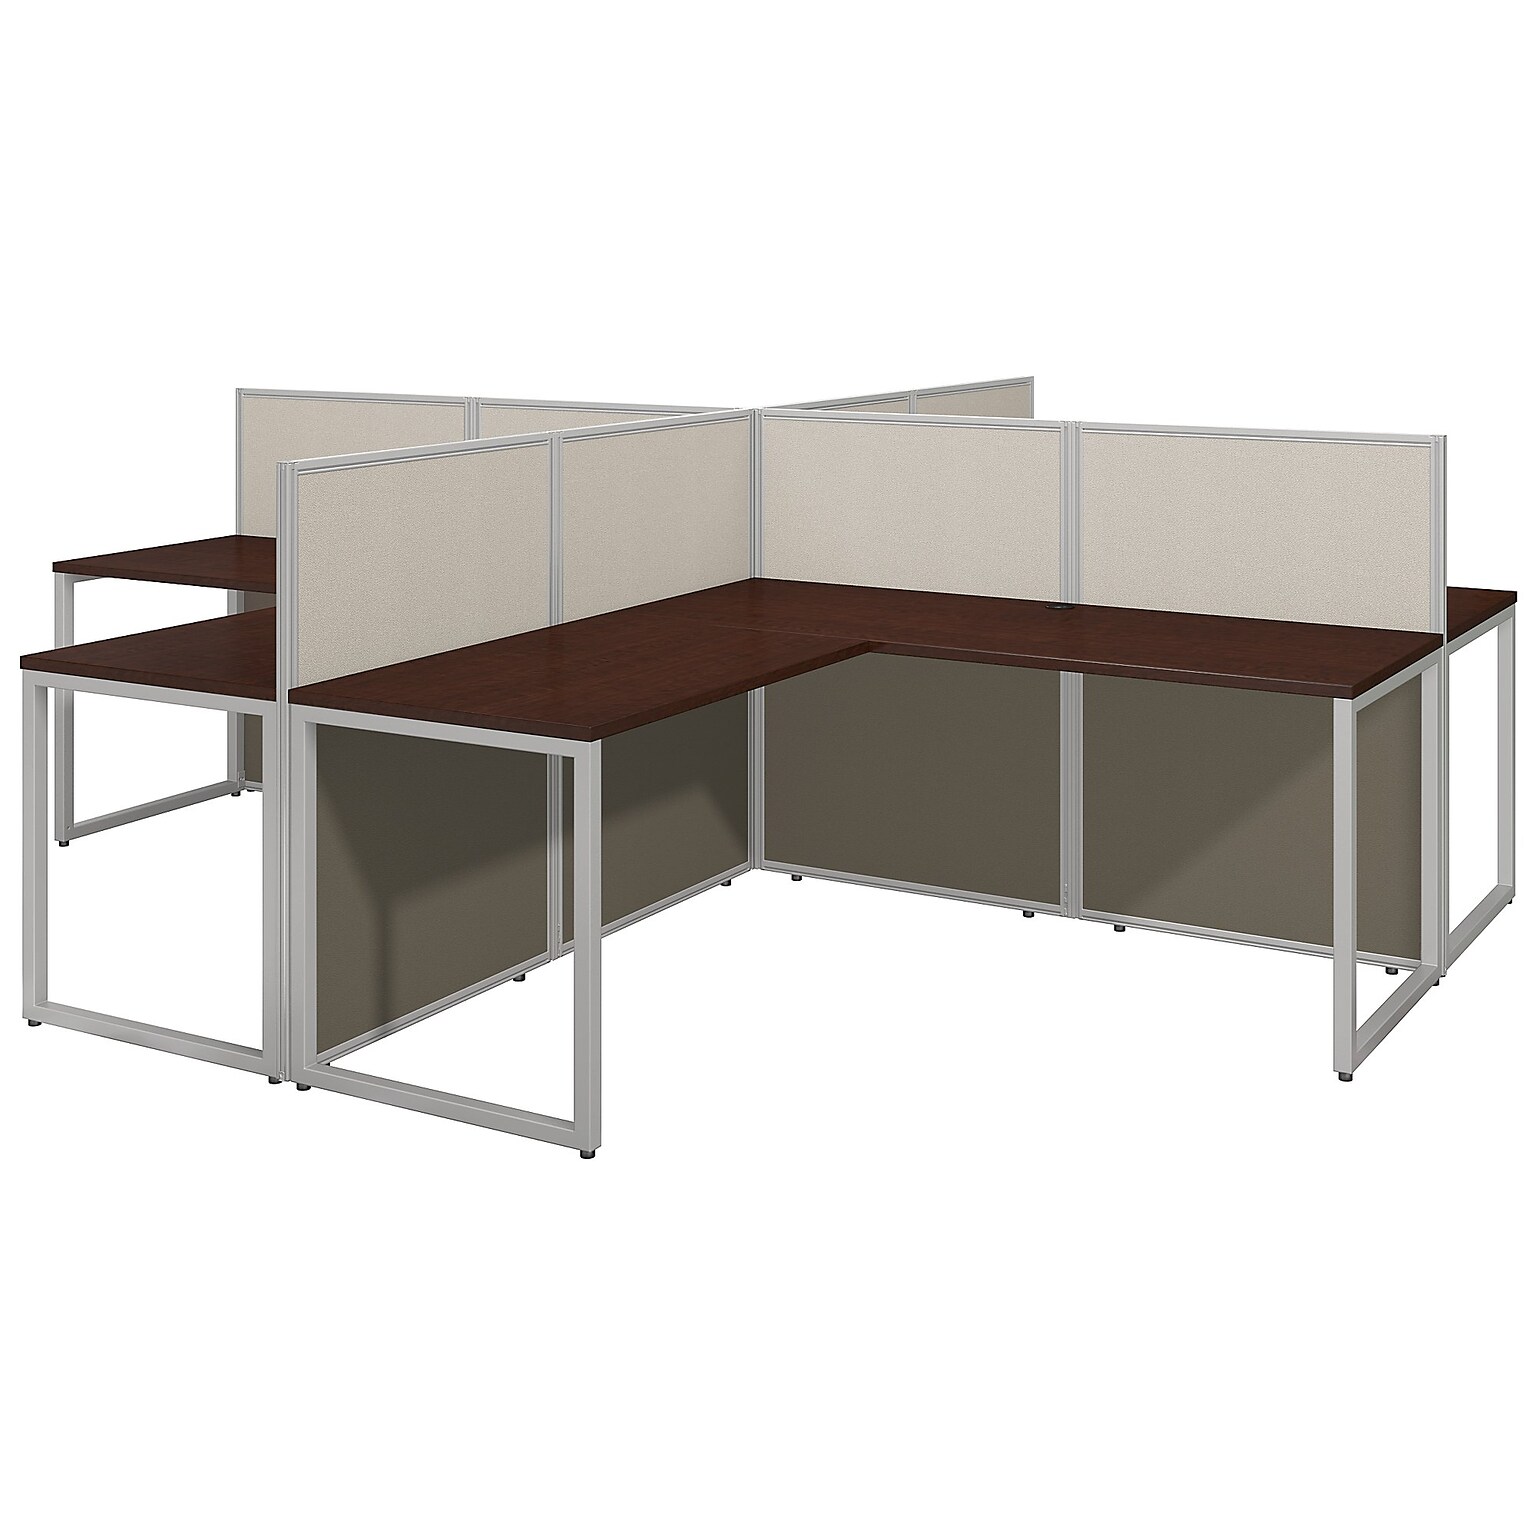 Bush Business Furniture Easy Office 44.88H x 119.09W 4 Person X-Shaped Cubicle Workstation, Mocha Cherry (EOD760MR-03K)